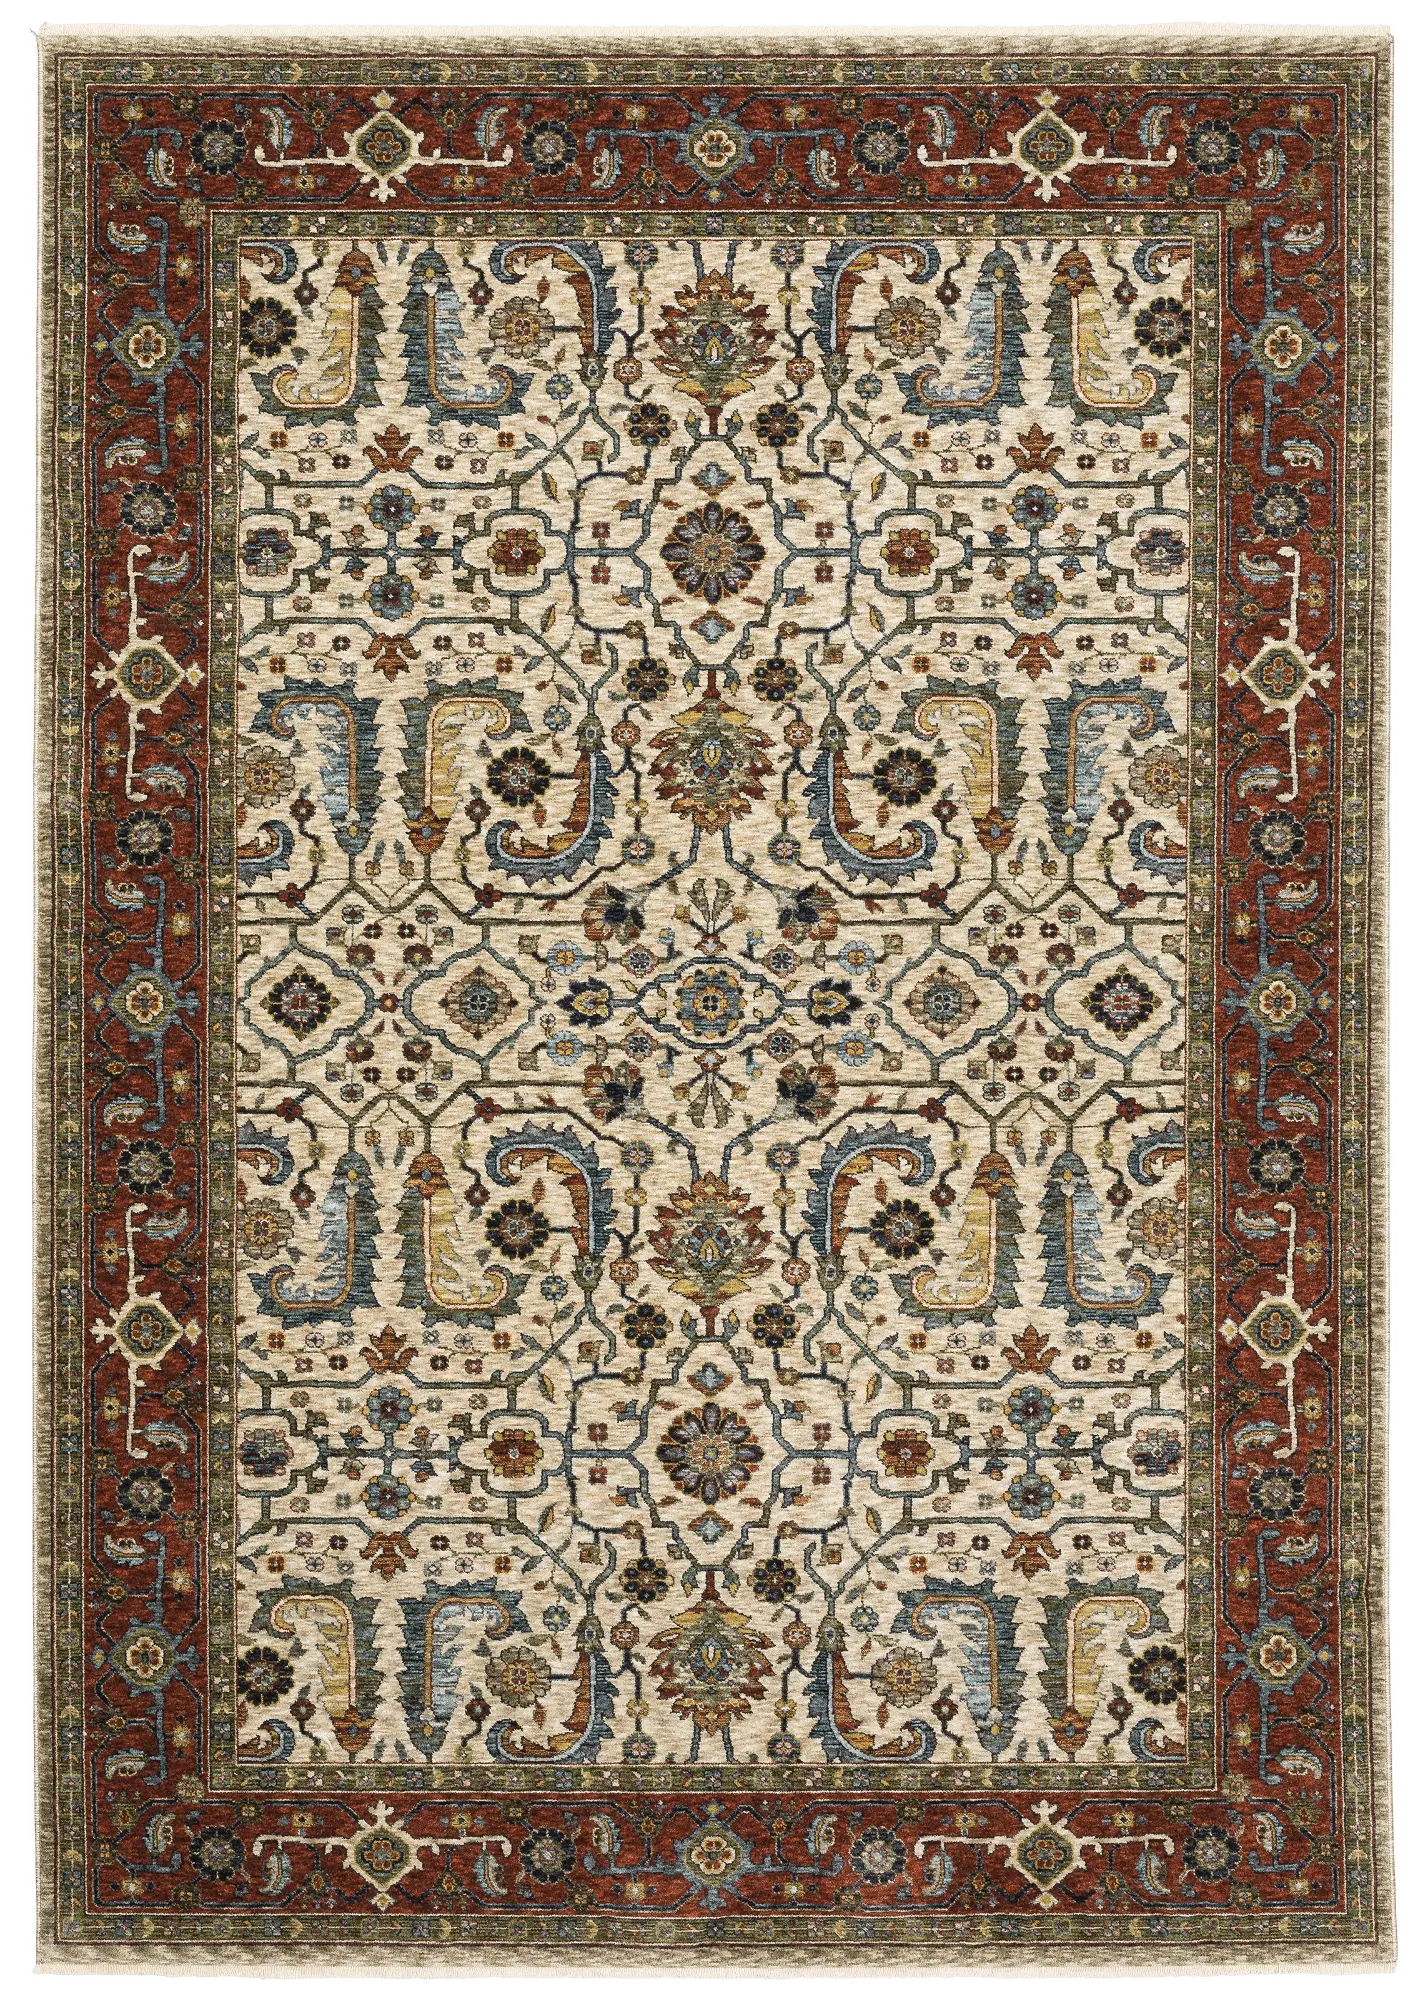 Aberdeen 5 x 8 Red and Ivory Area Rug